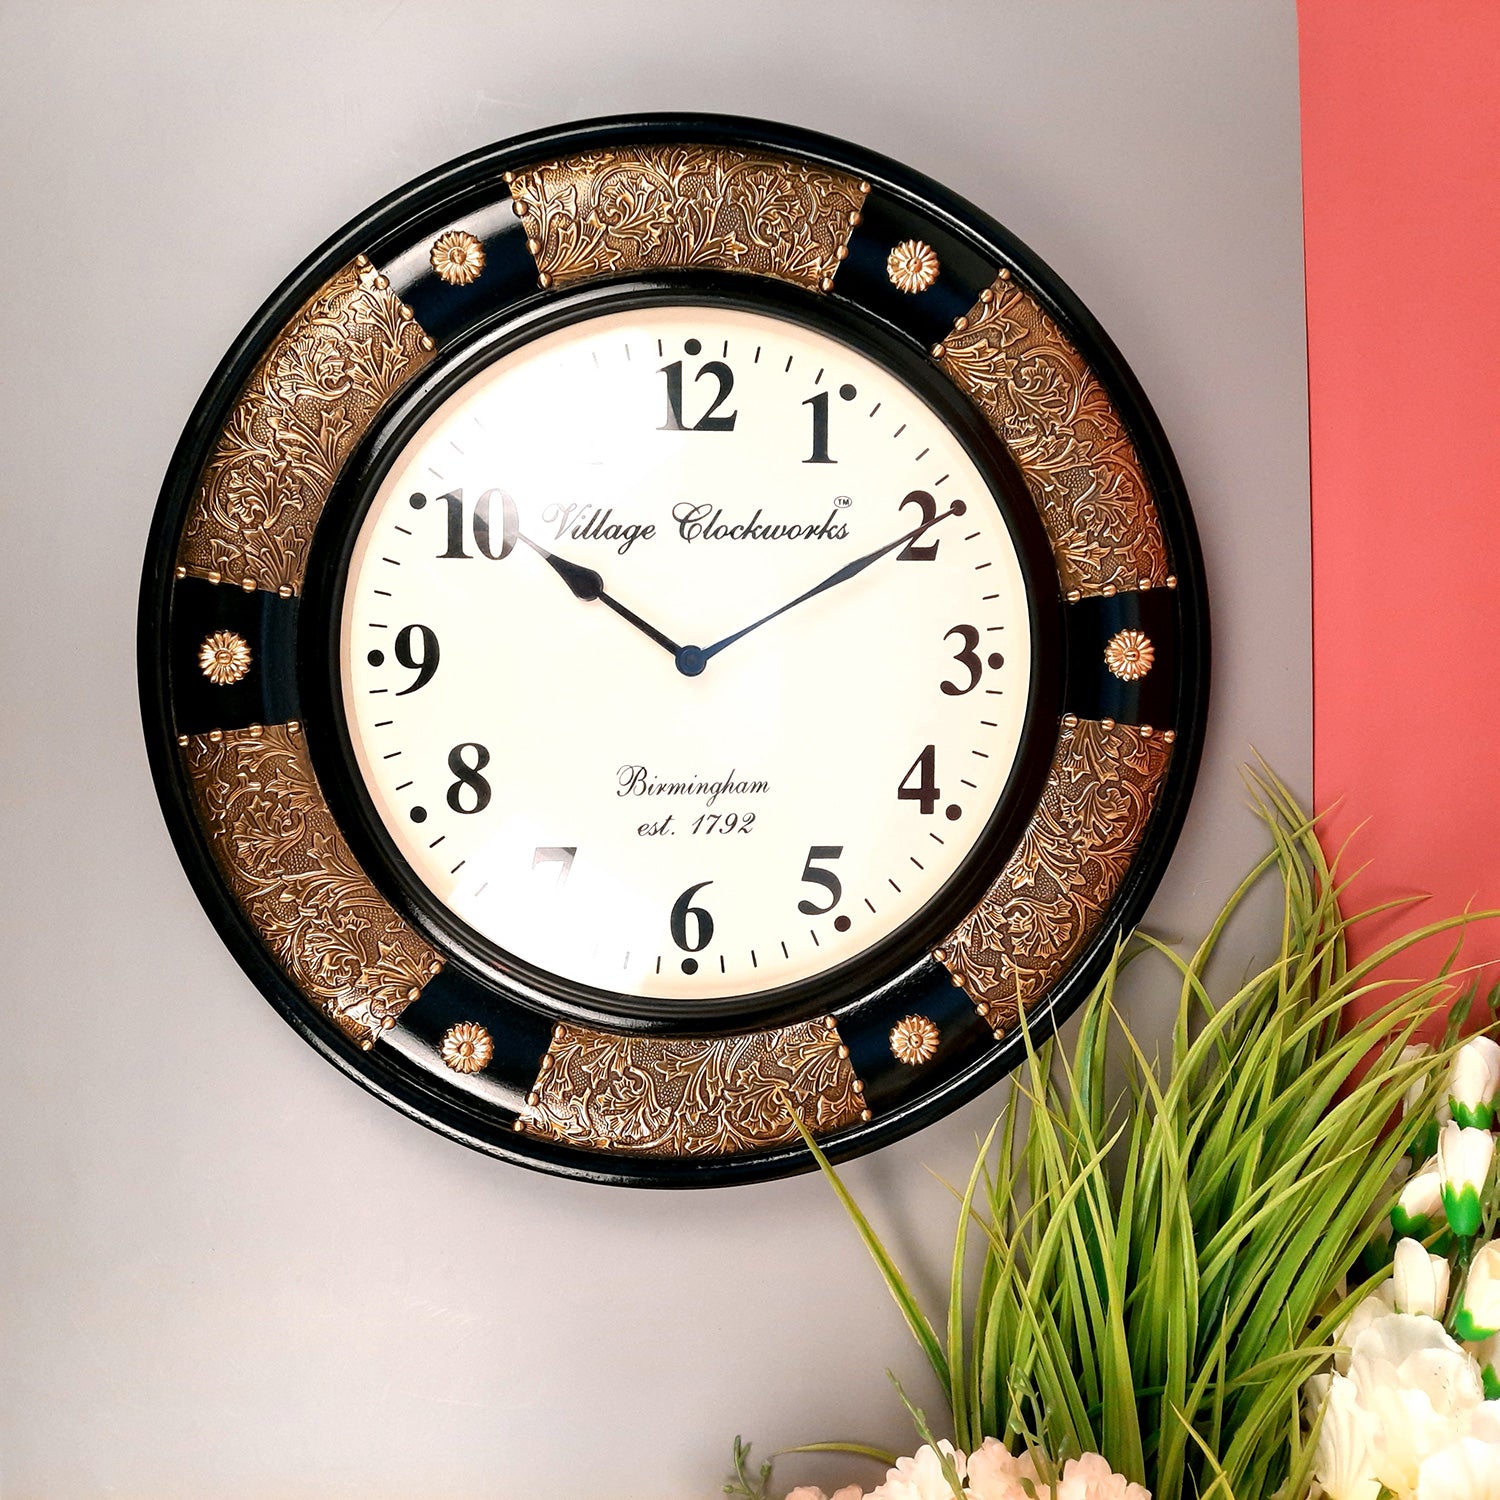 Wall Clock Vintage for Living Room | Wall Mount Clock Antique With Roman Numbers - For Home, Office, Bedroom, Hall Decor & Gifts - 18 Inch - Apkamart